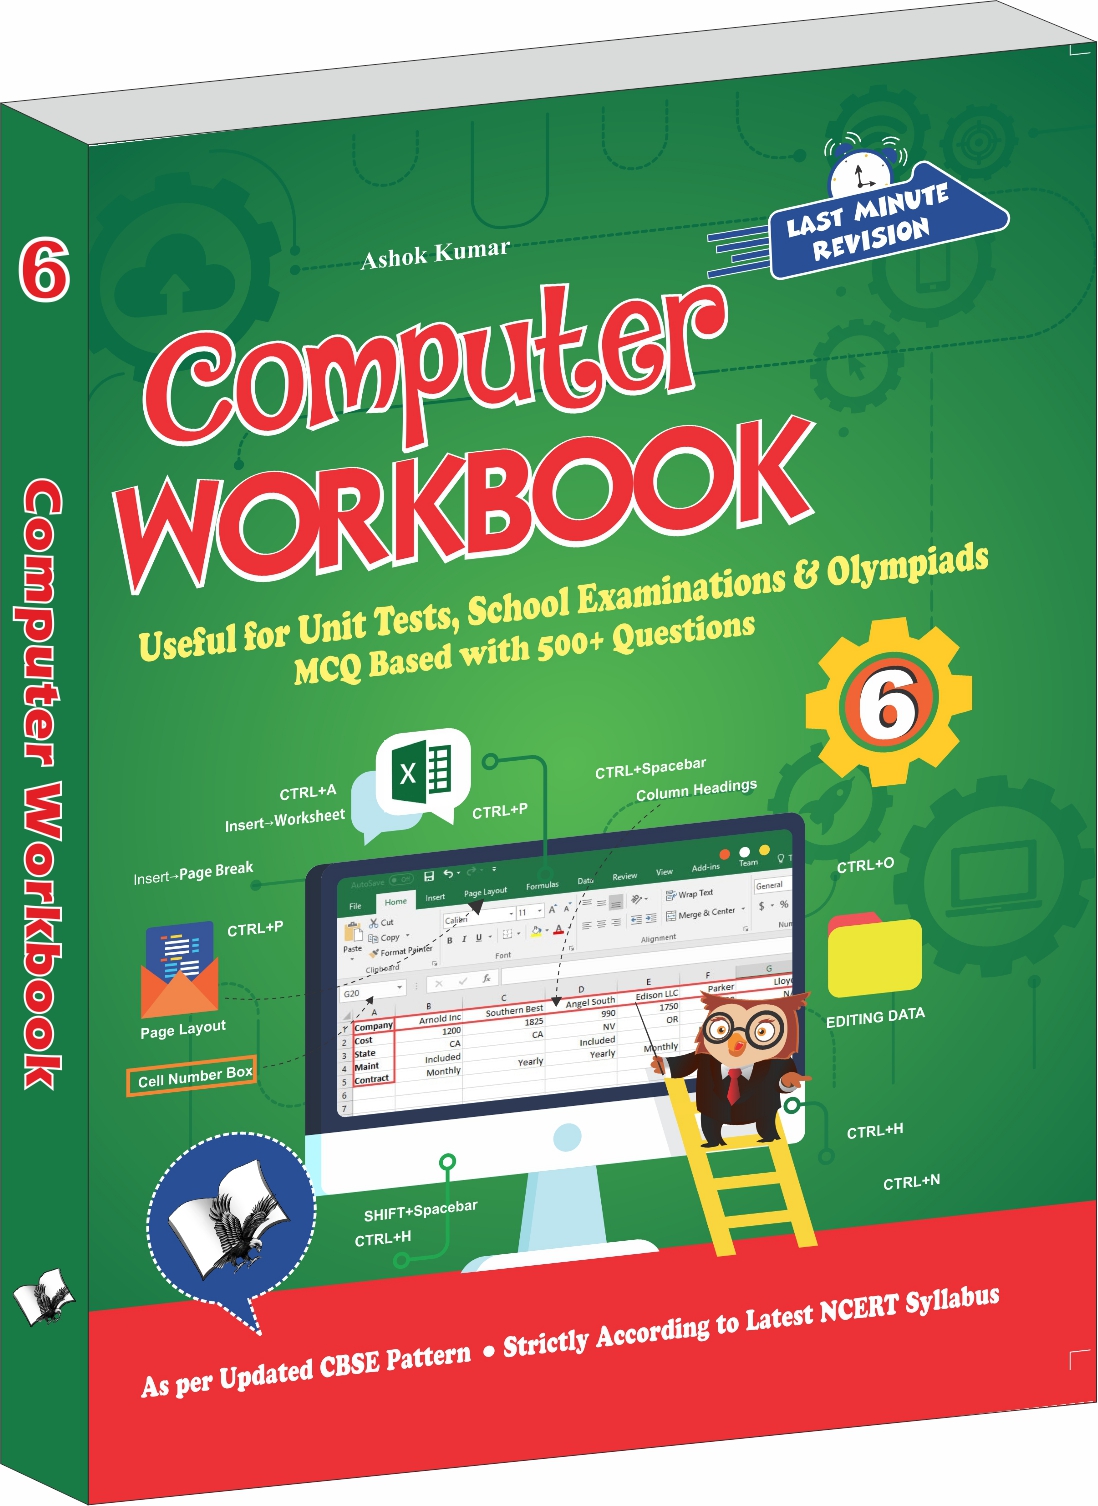 computer-workbook-class-6-useful-for-unit-tests-school-examinations-olympiads